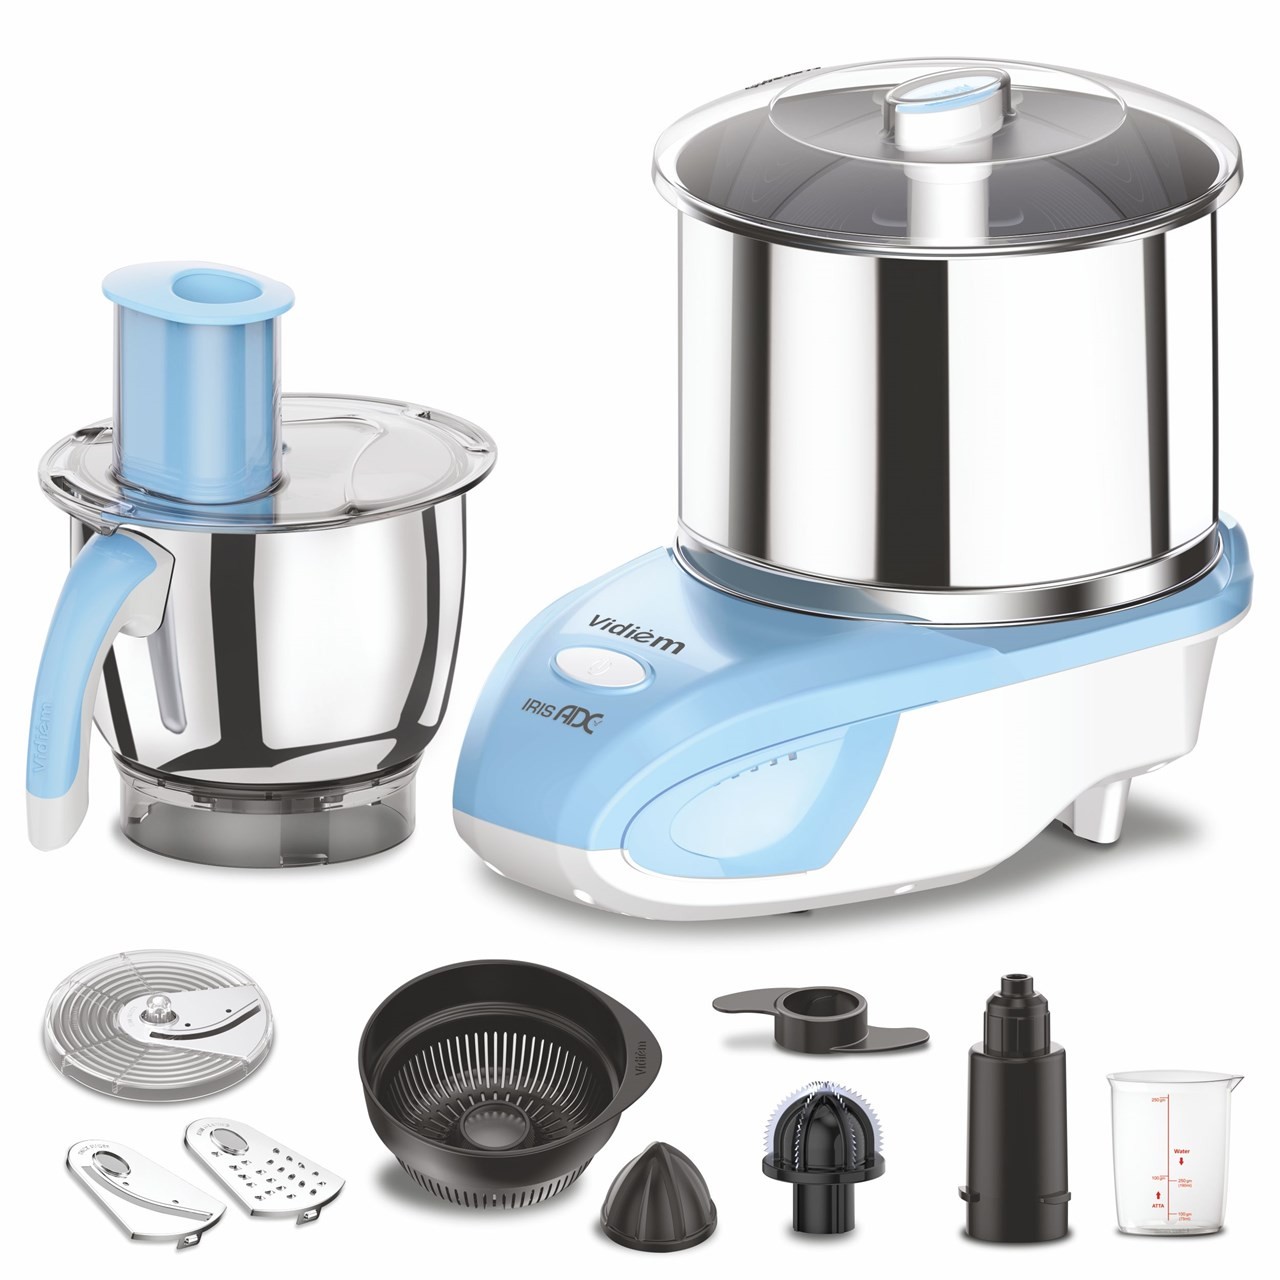 vidiem-iris-2l-multi-purpose-wet-grinder-ss-drum-stone-rollers-food-processor-multi-chef-jar-atta-kneader-110v90w-for-usa-canada-motor-rpm-1440-and-drum-rpm-150-home-commercial-use2